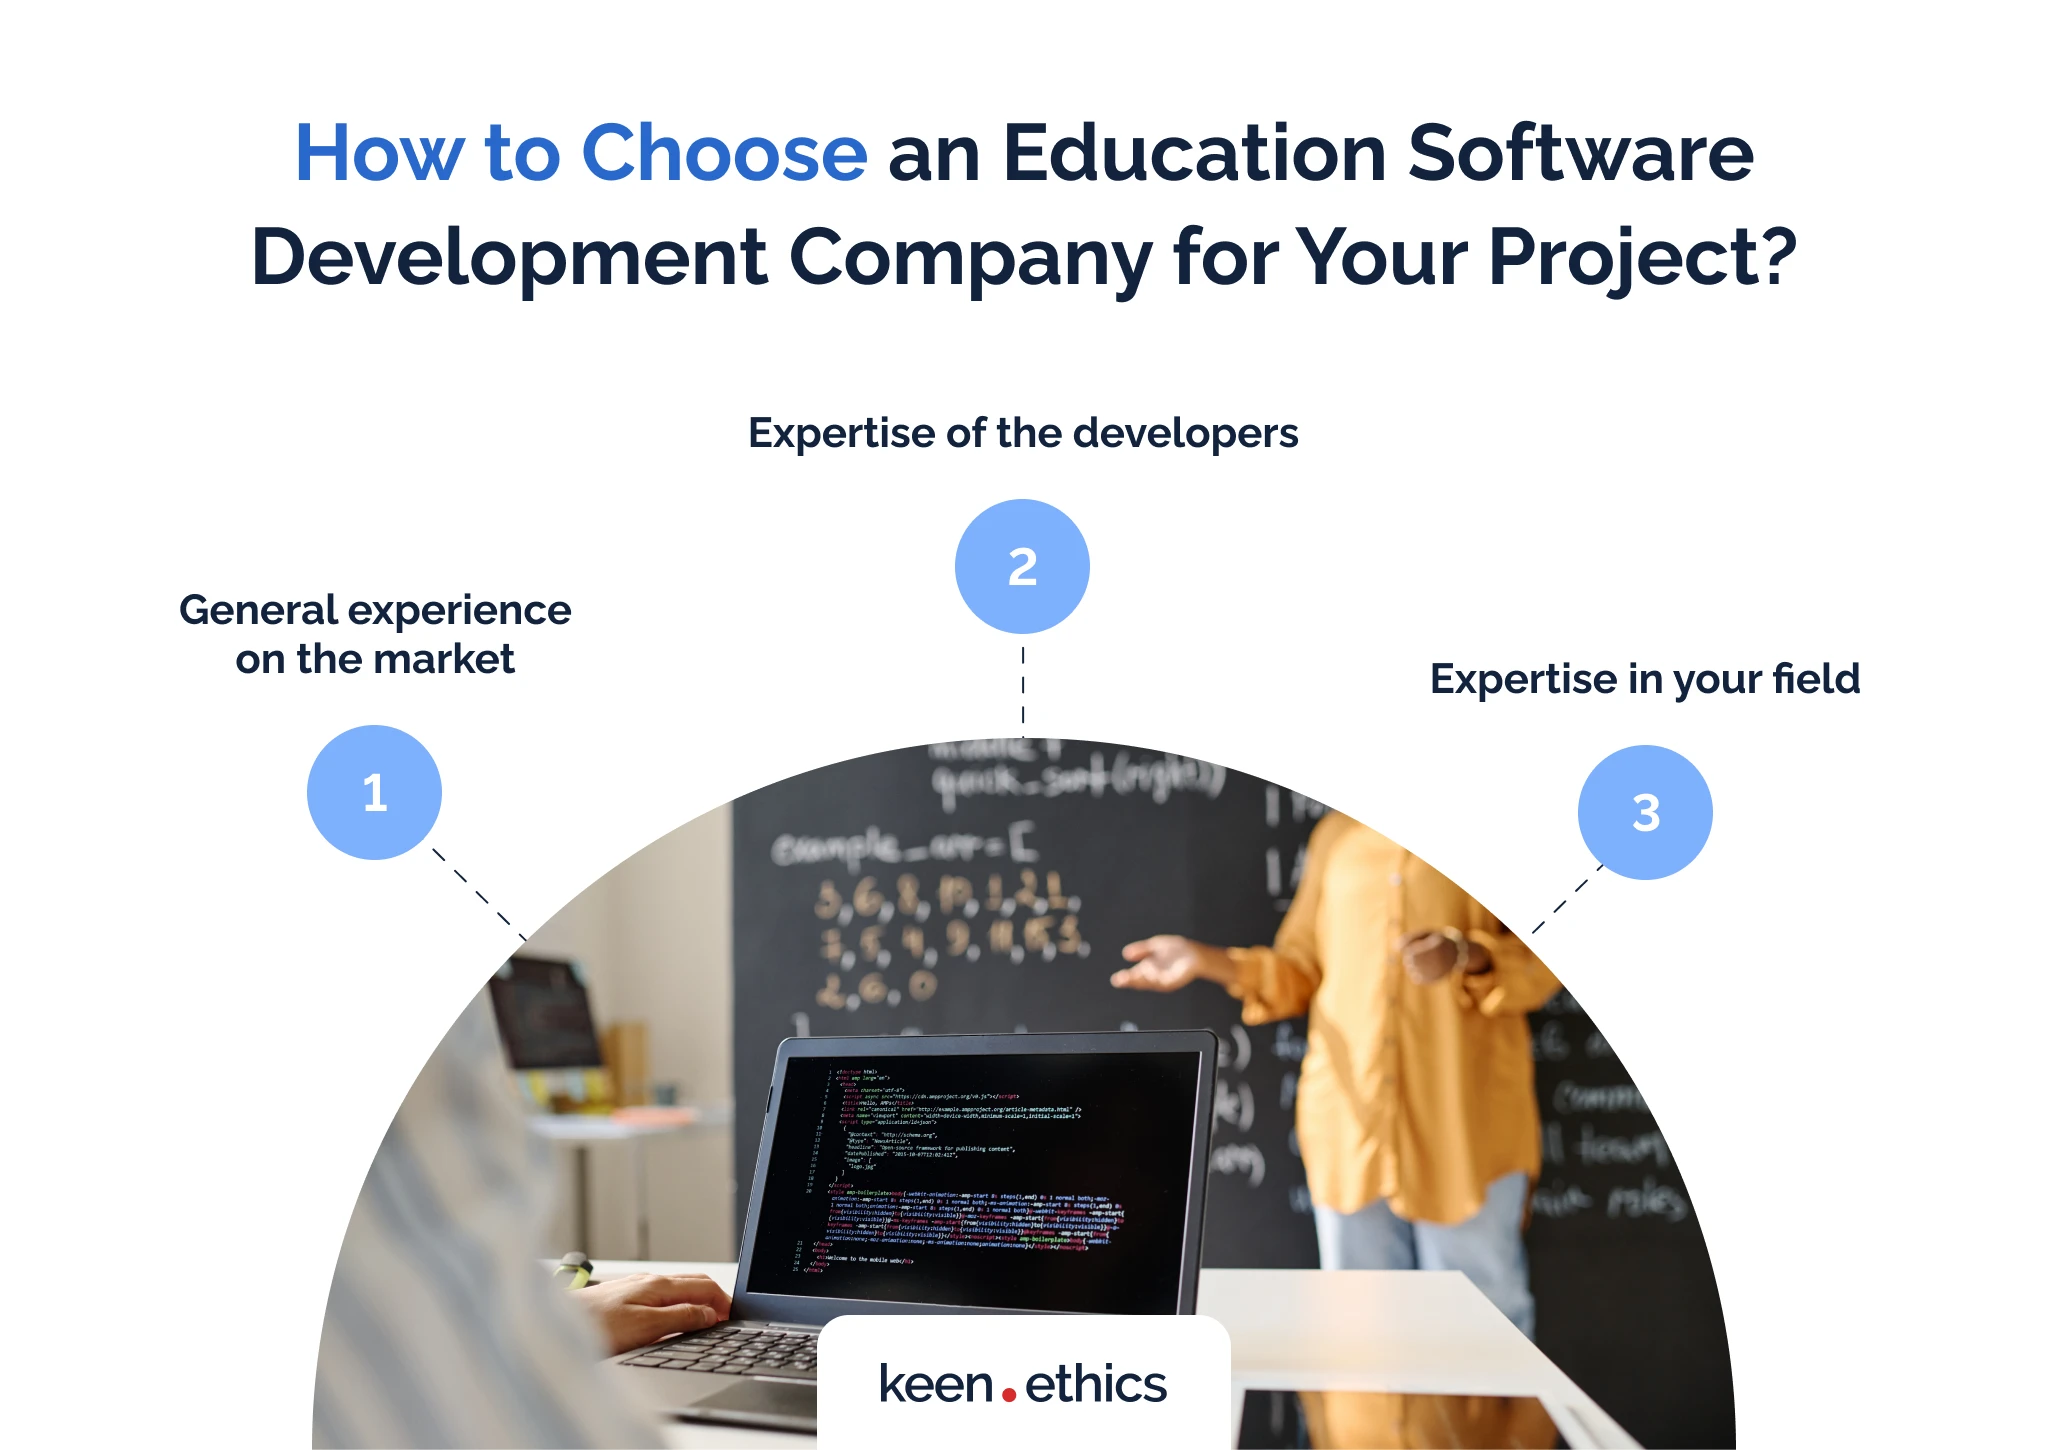 How to choose an education software development company for your project